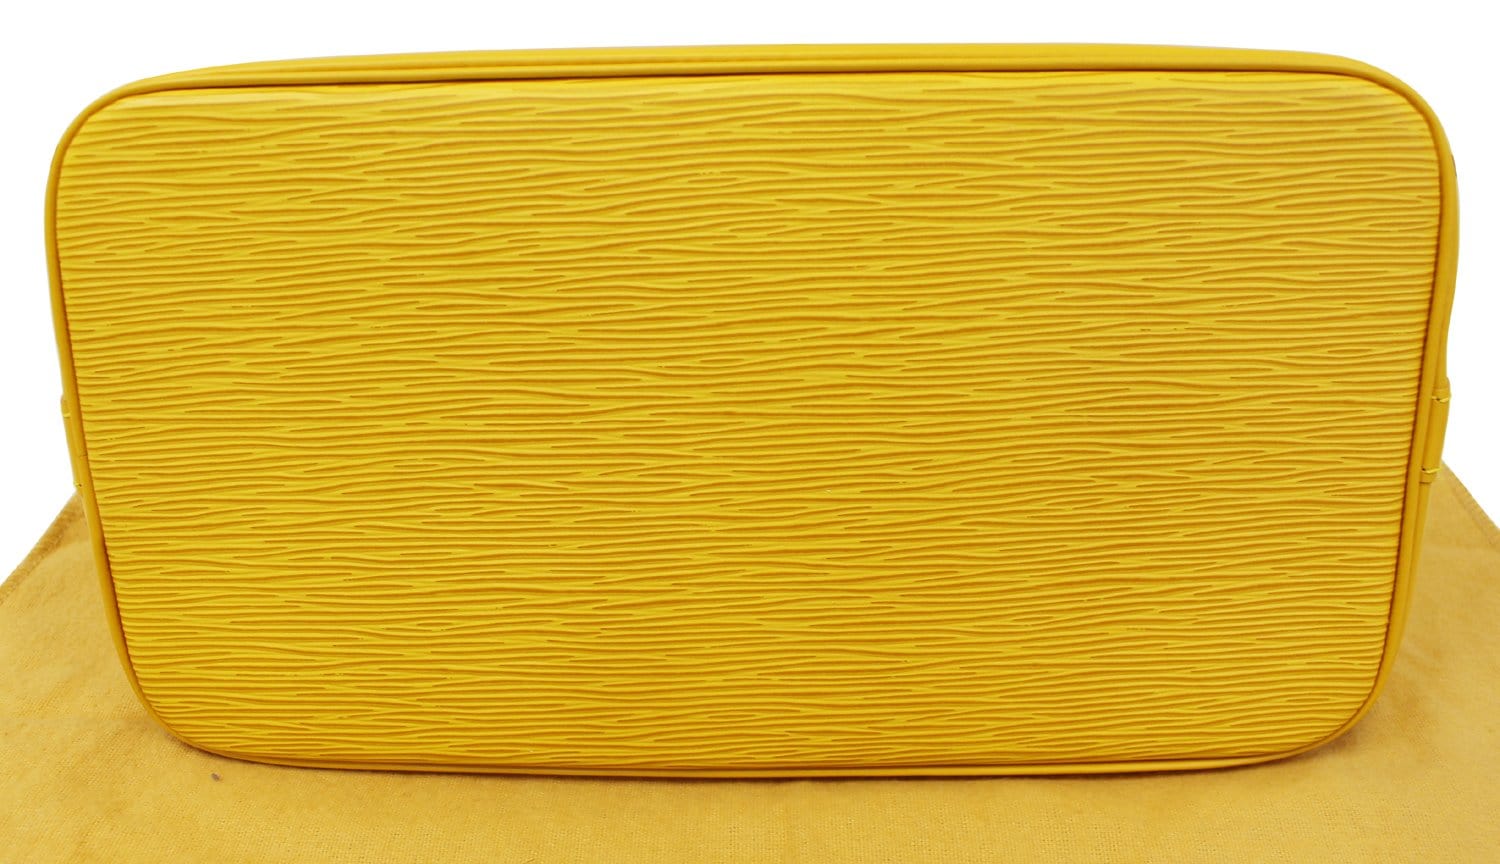 Louis Vuitton Alma PM in Citron Yellow Epi Leather with Shiny Silver  Hardware - SOLD